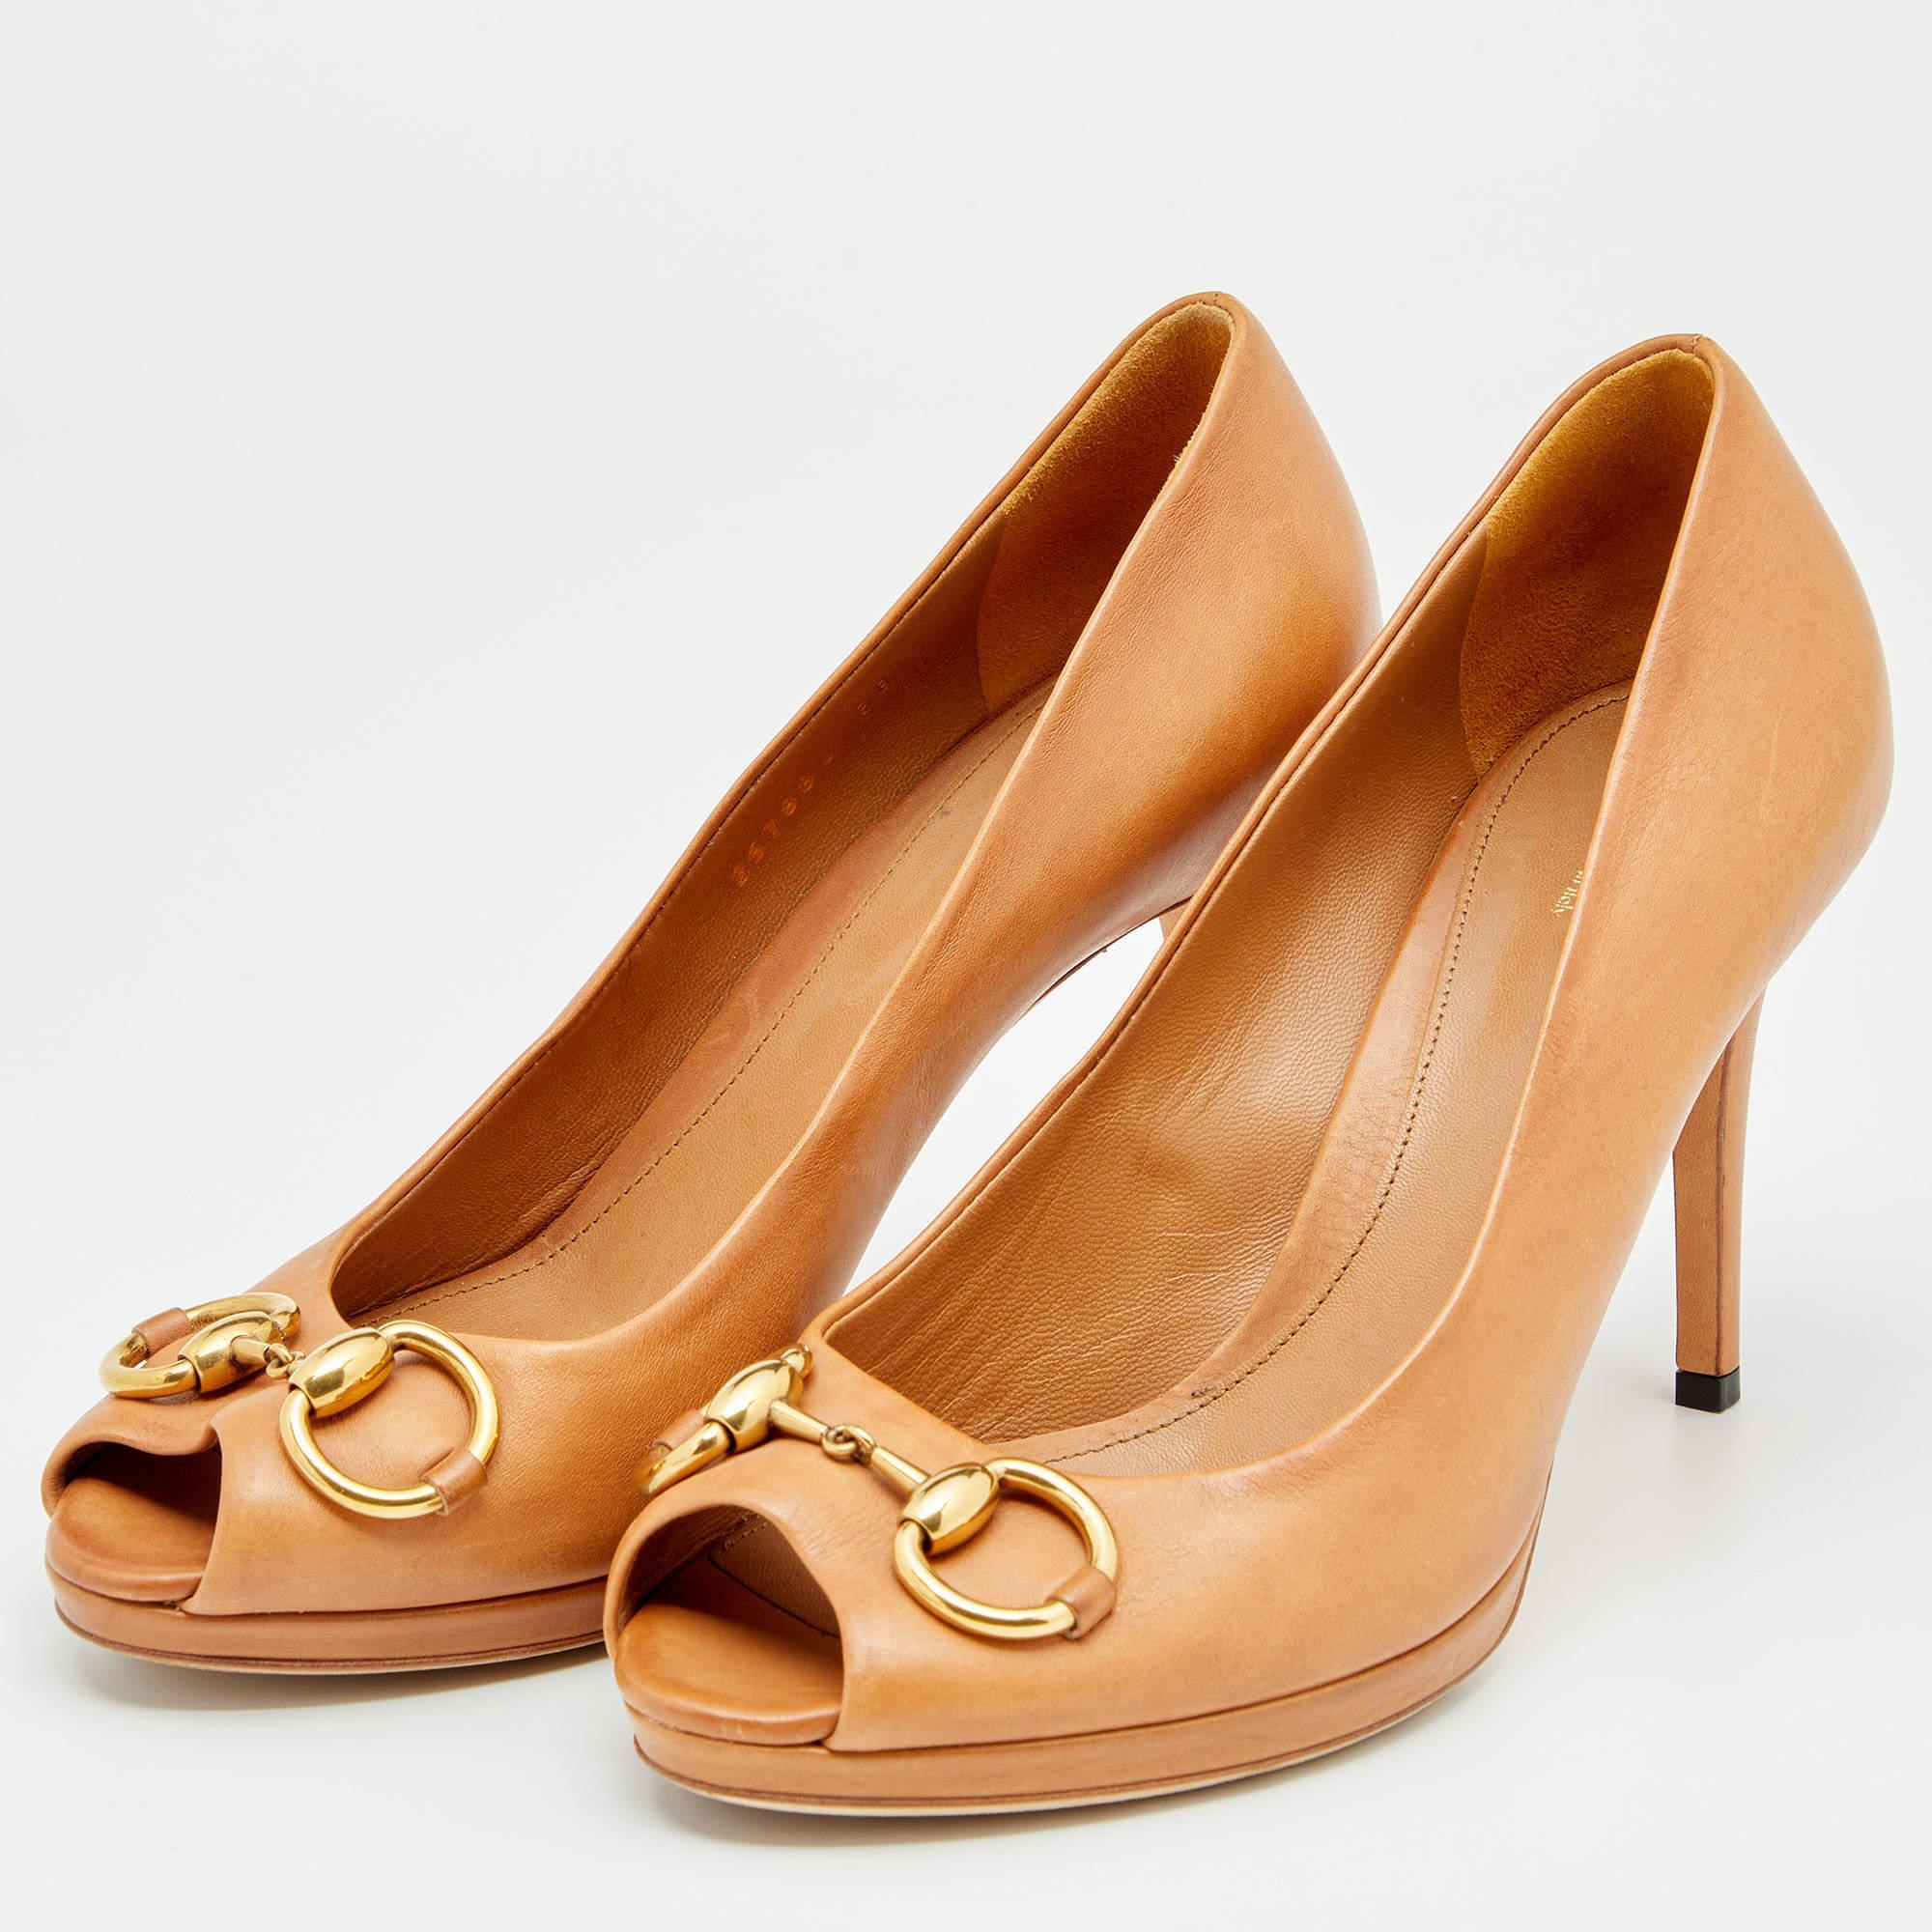 Gucci's timeless aesthetic and stellar craftsmanship in shoemaking is evident in these stunning pumps. Crafted from leather in a brown shade, they are topped with the signature Horsebit accent and mounted on tall heels for the right amount of